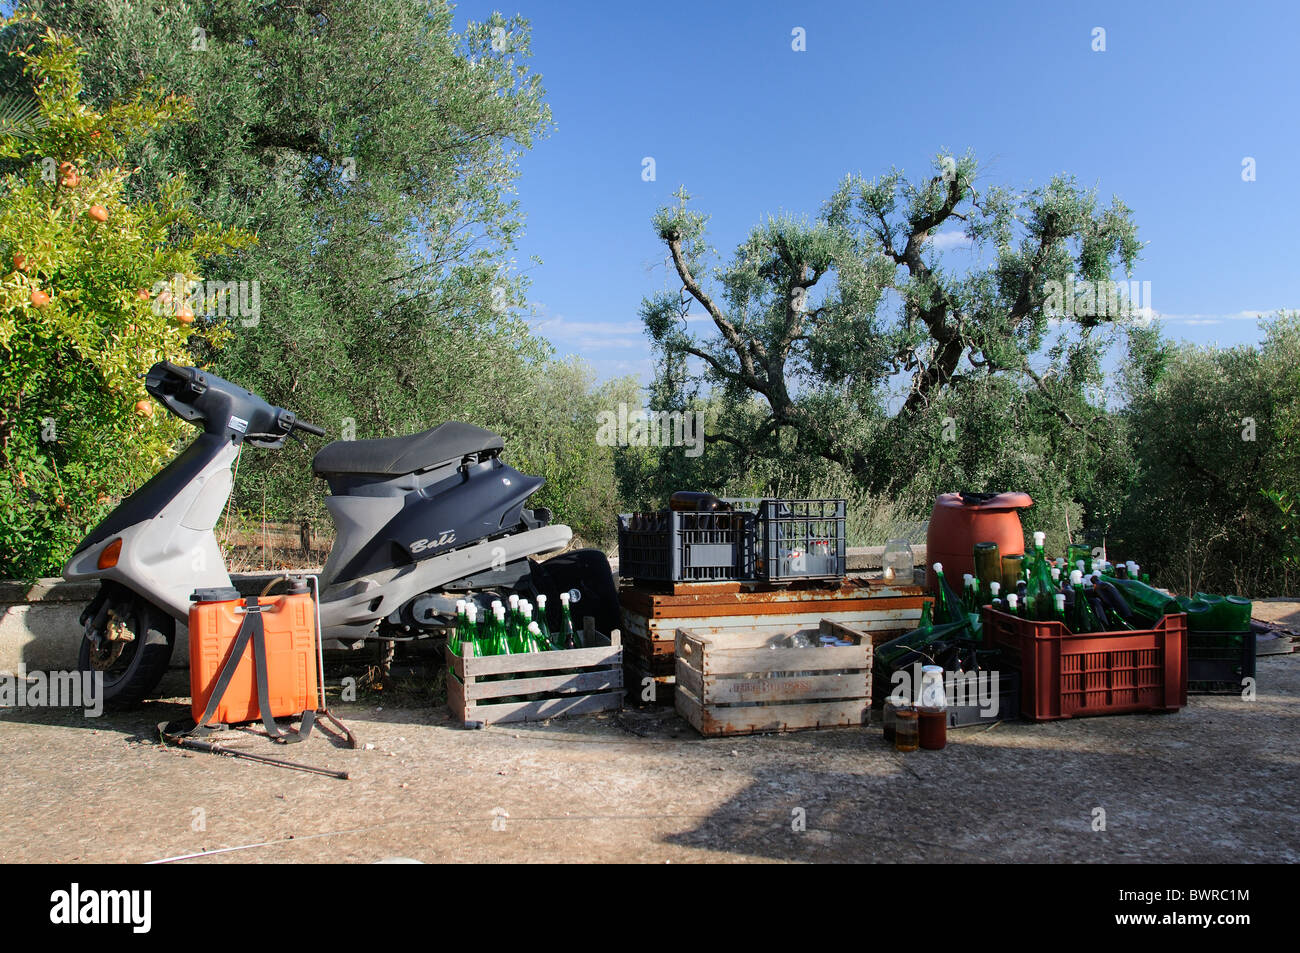 Scooter with bottles and assorted junk on garden driveway in Italy Stock Photo